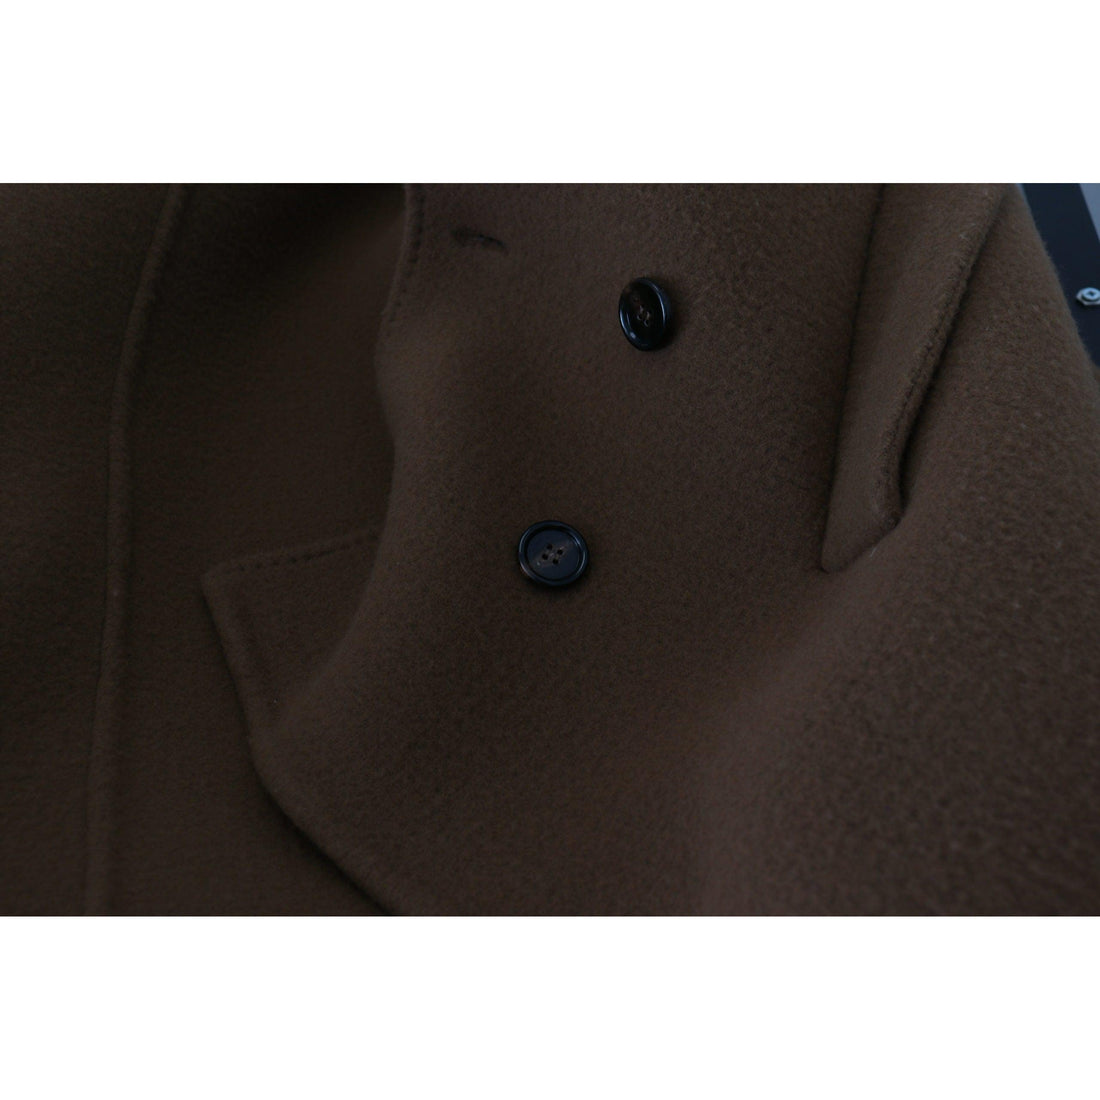 Dolce & Gabbana Brown Nylon Double Breasted Coat Jacket